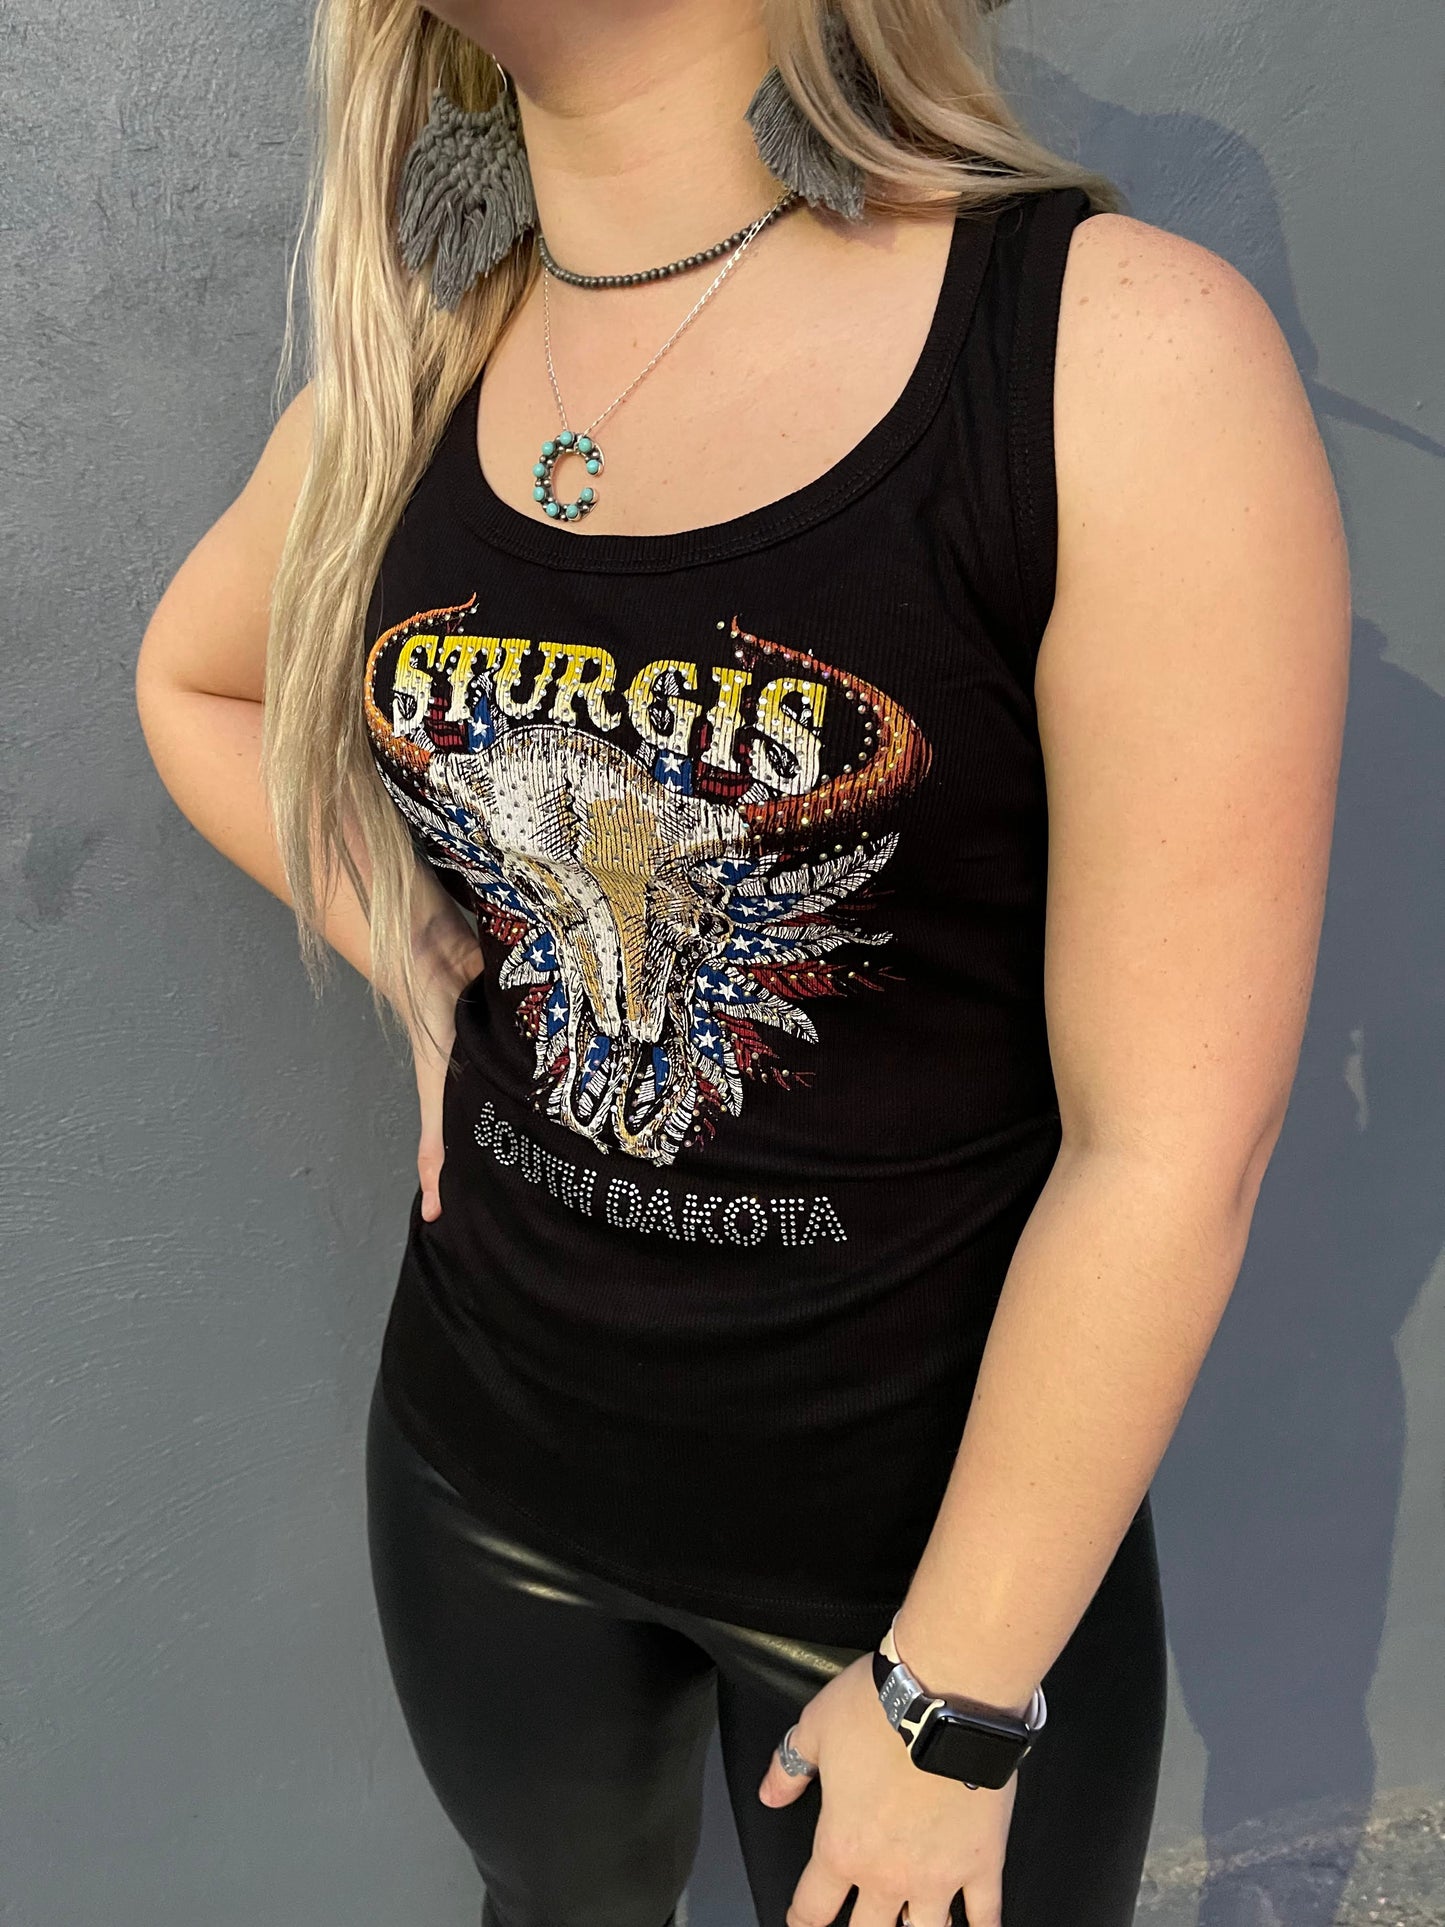 Sturgis Red White and Bull Tank - USA MADE